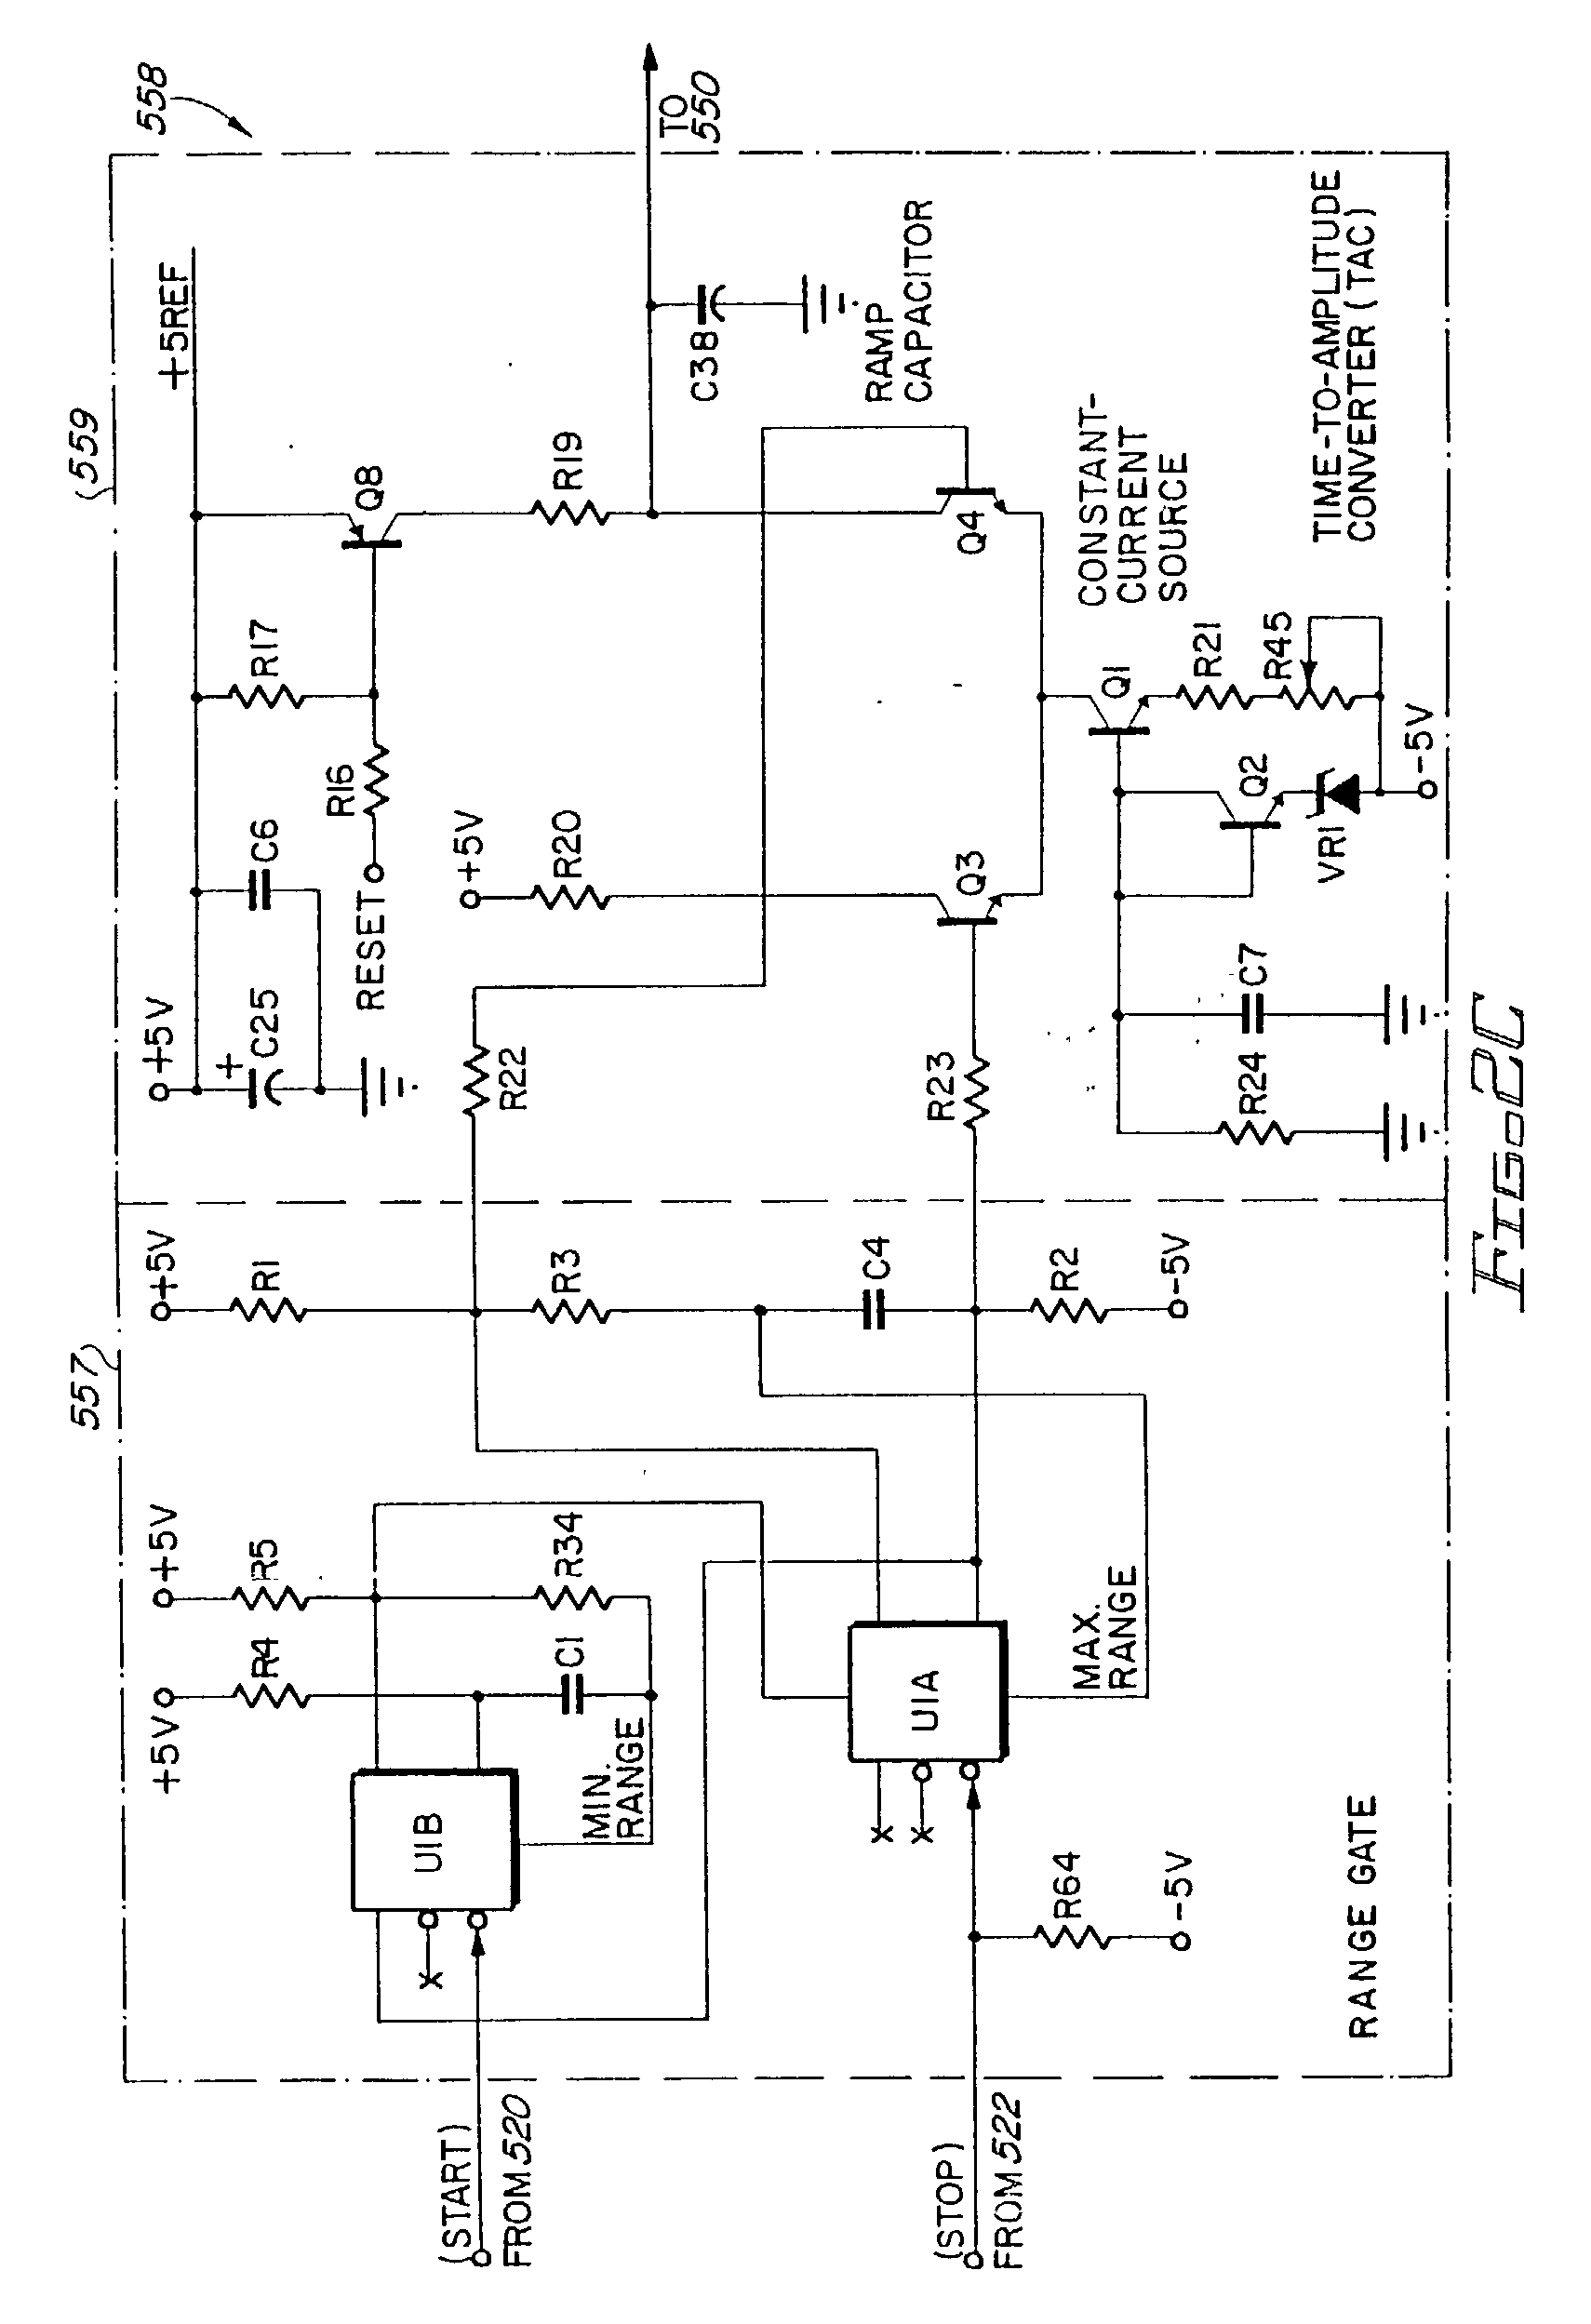 Vehicle classification and axle counting sensor system and method